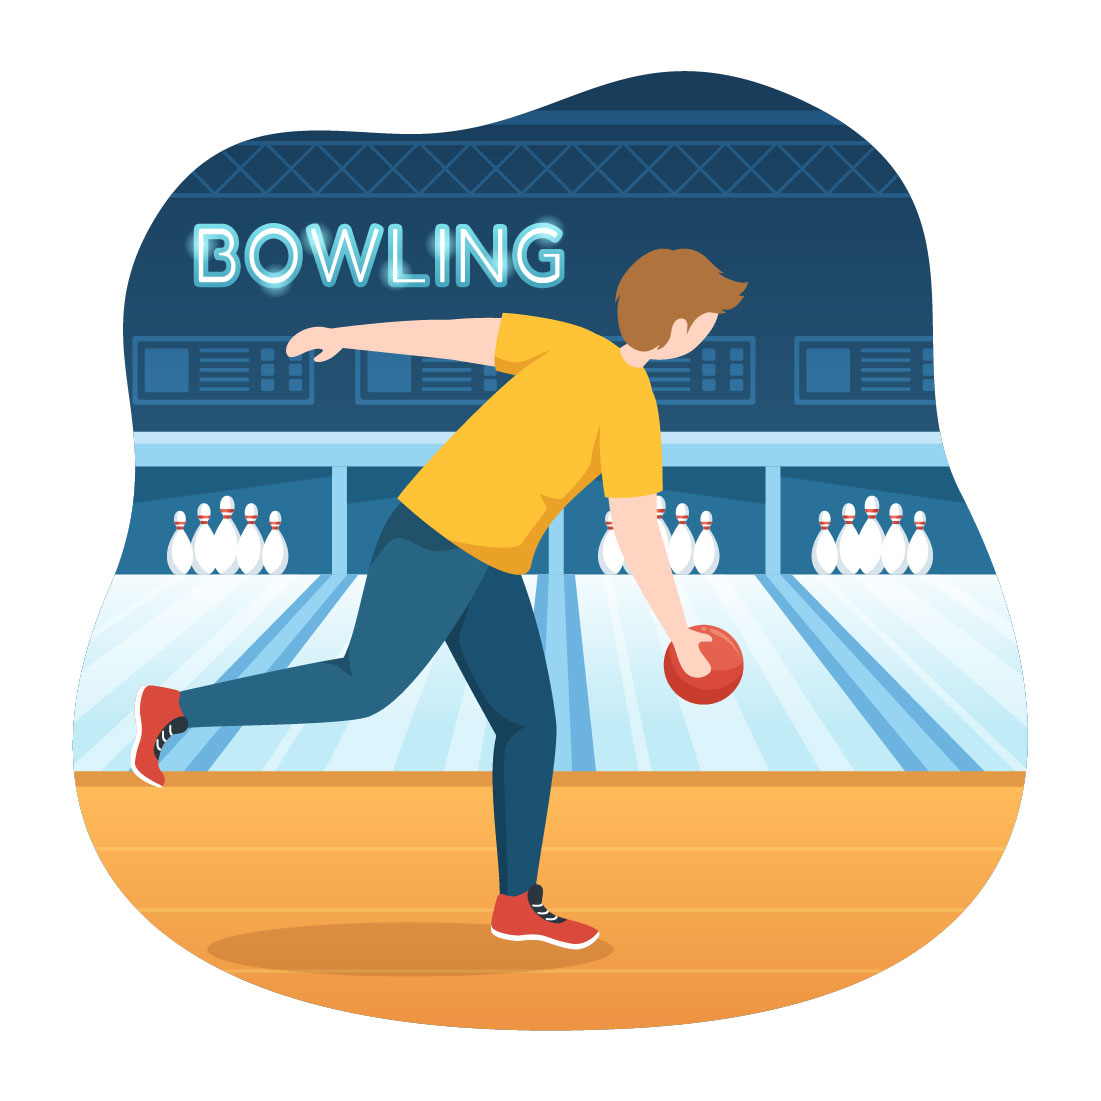 12 Bowling Game Illustration cover image.